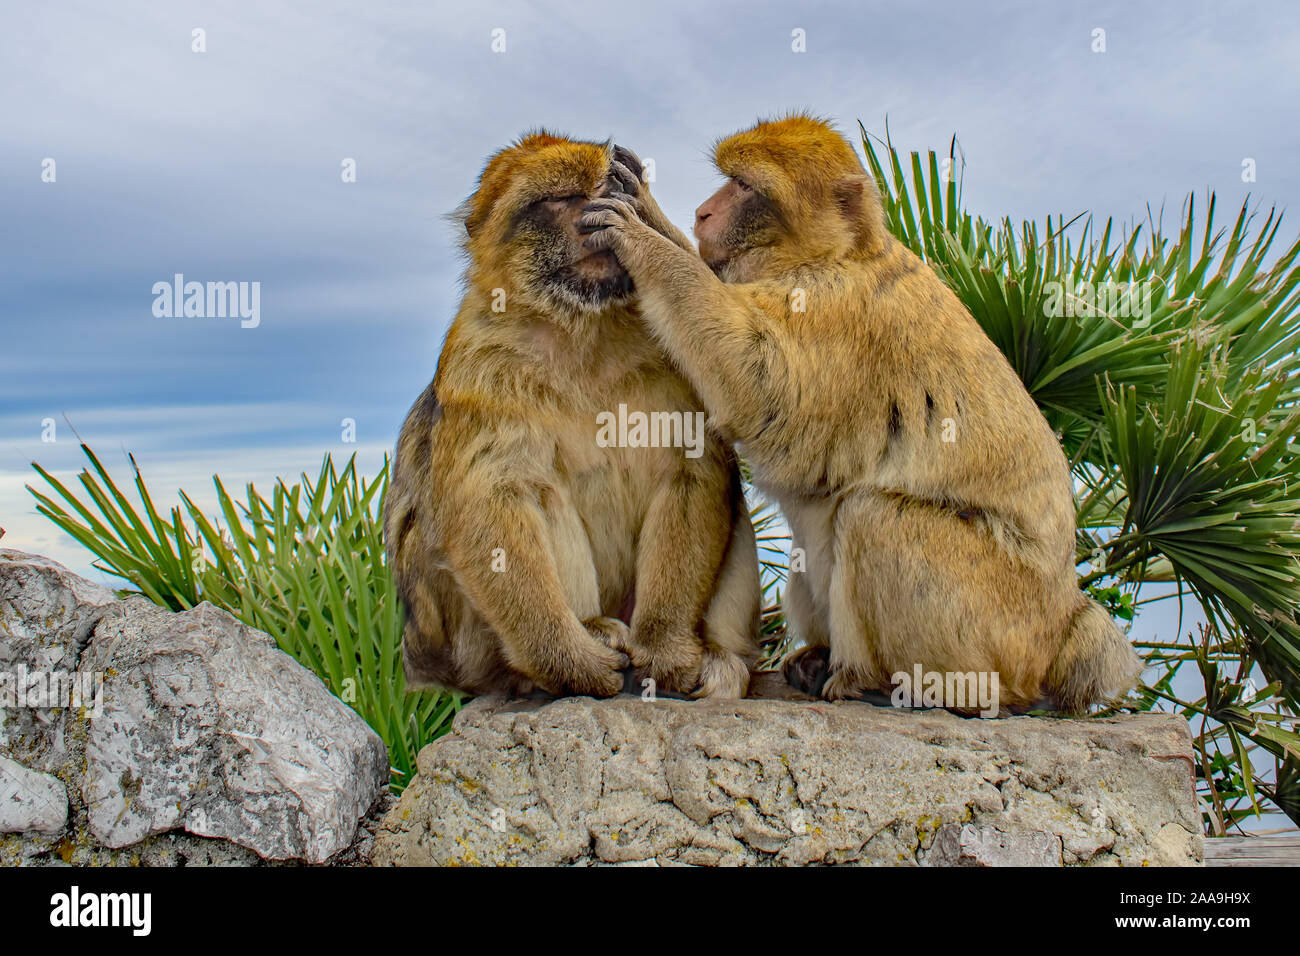 A female Barbary Ape in serious study grooming a male Gibraltar Barbary Ape's face Stock Photo